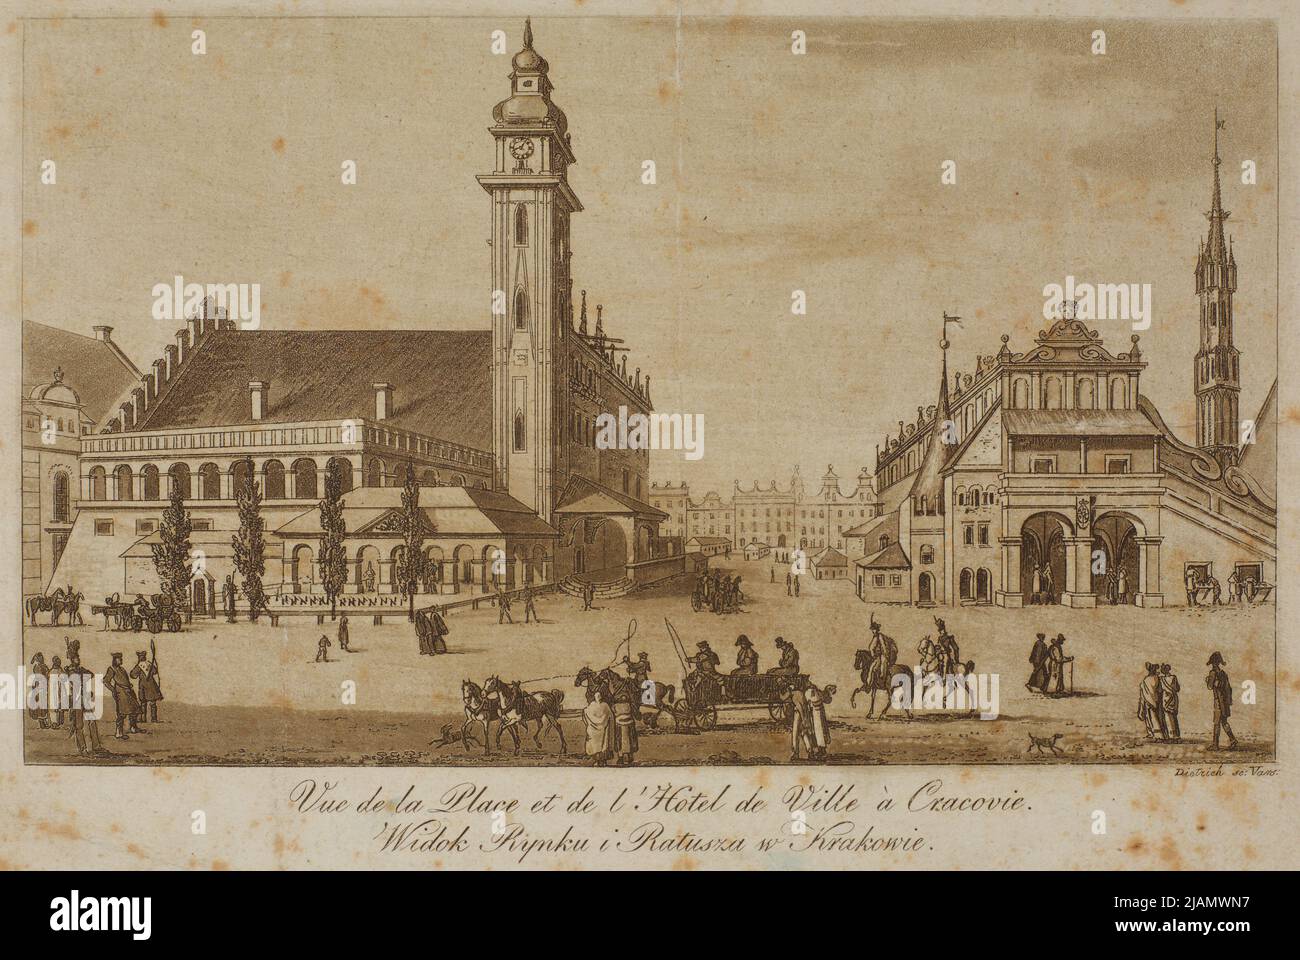 Main Square from the South, from: Józef Kraszewski, Guide to Poland and travel in in La Repubiie de Cracovie, Warsaw 1820, Tabl. NLB.1 Dietrich, Adolf Fryderyk (1817 1860) Stock Photo